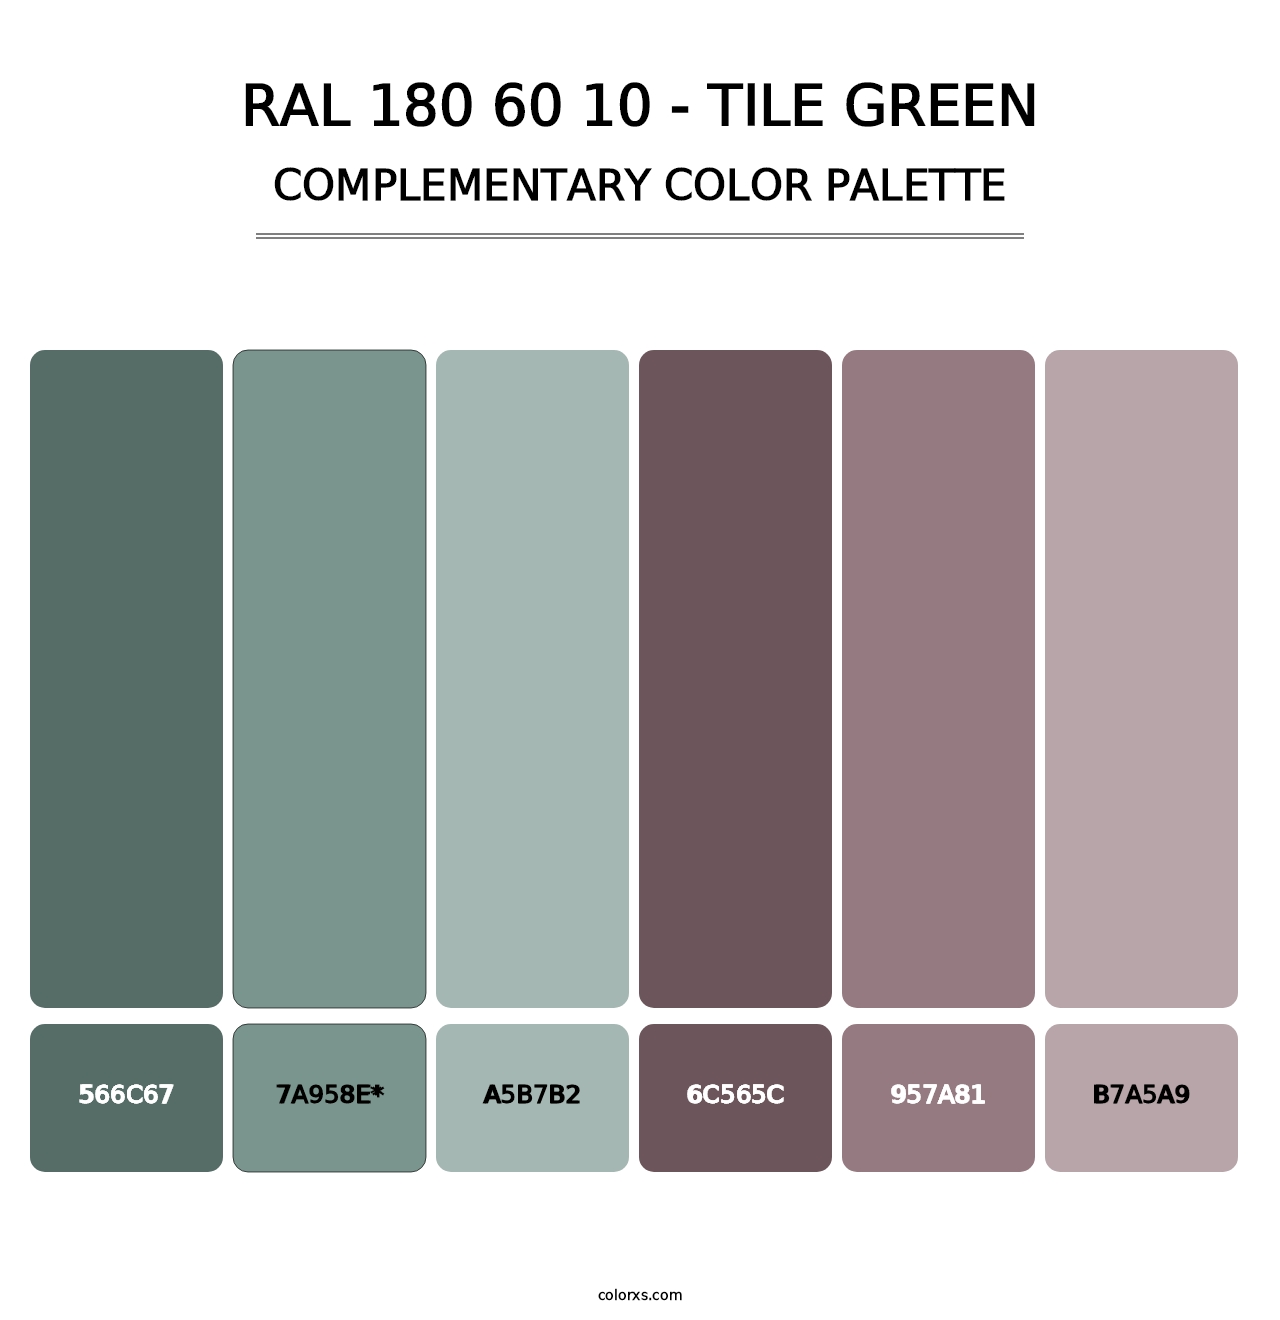 RAL 180 60 10 - Tile Green - Complementary Color Palette